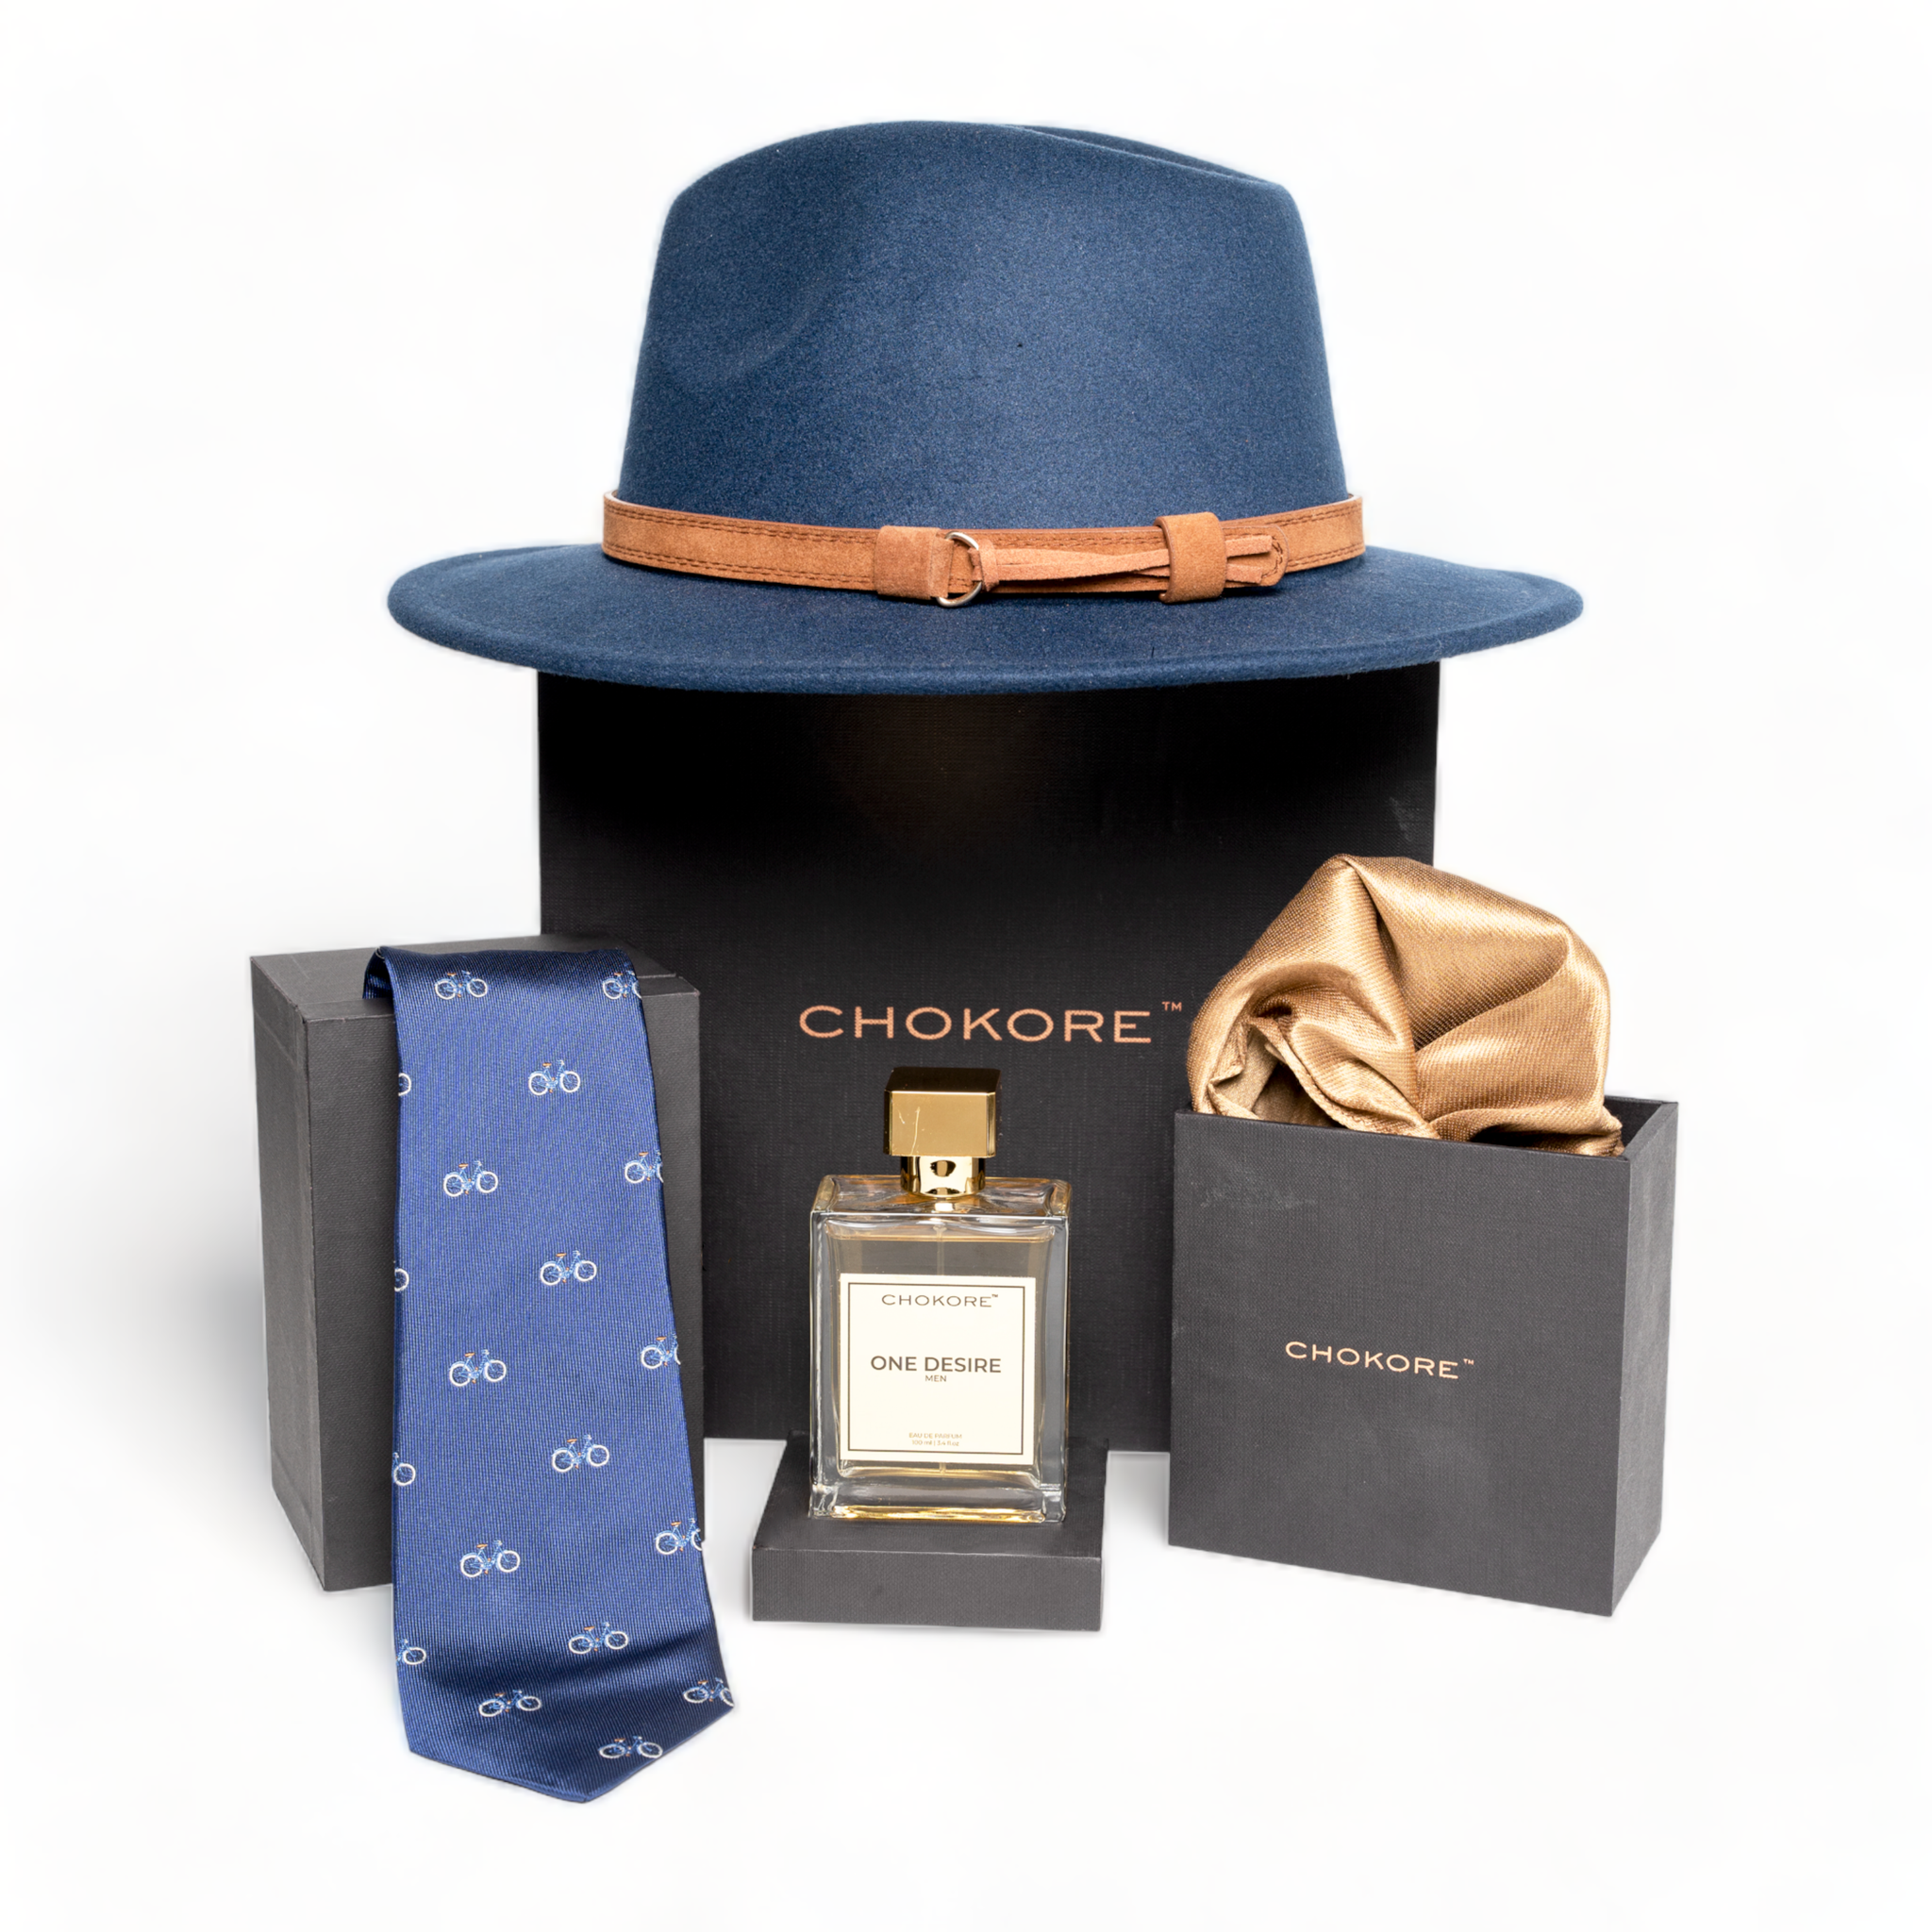 Chokore Special 4-in-1 Gift Set for Him (Pocket Square, Necktie, Hat & 100 ml One Desire Perfume)